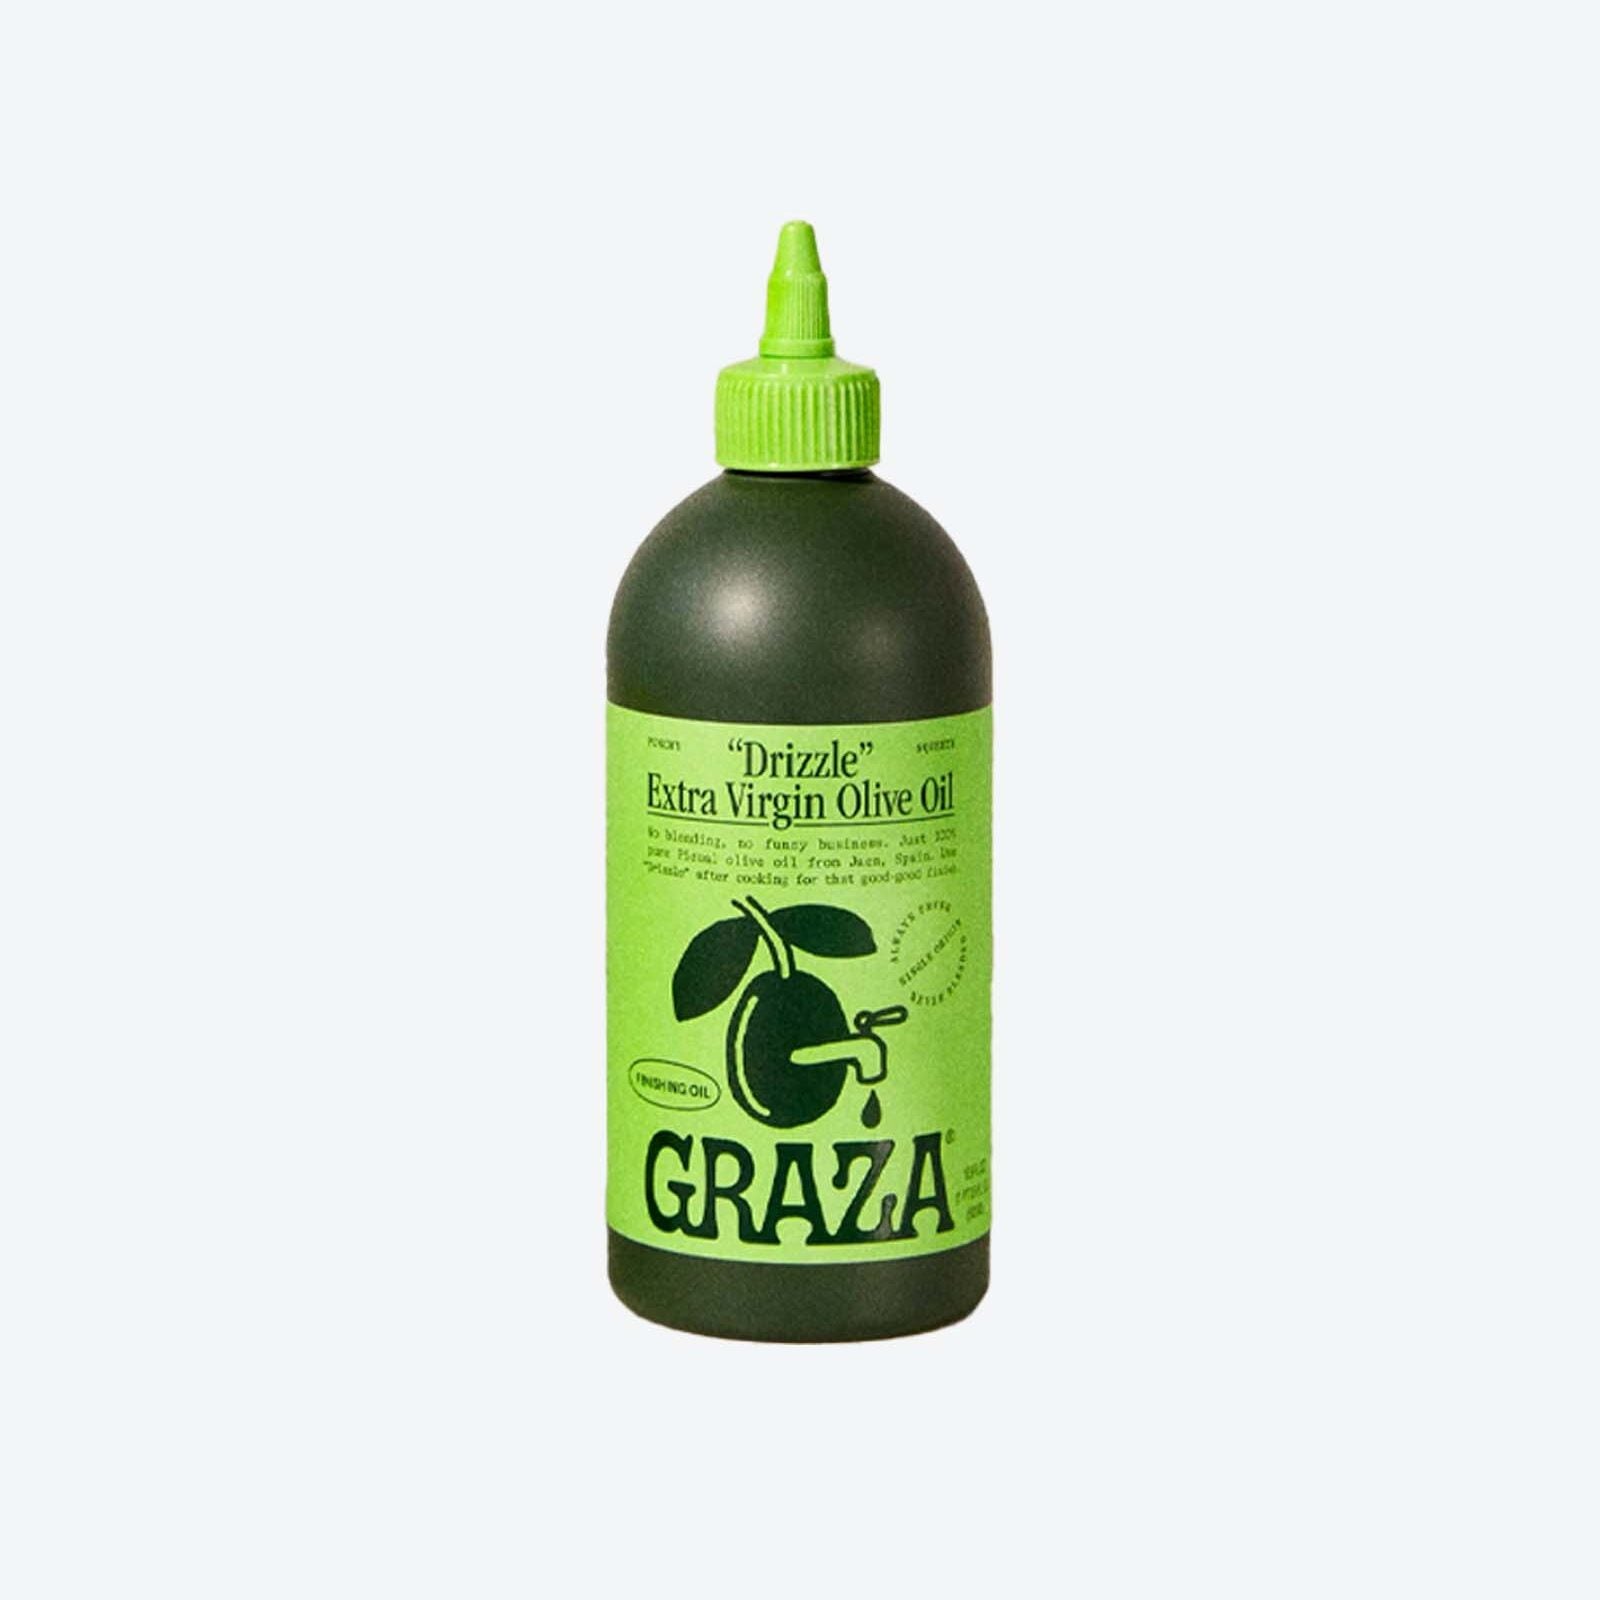 Graza "Drizzle" Extra Virgin Olive Oil against a white background.